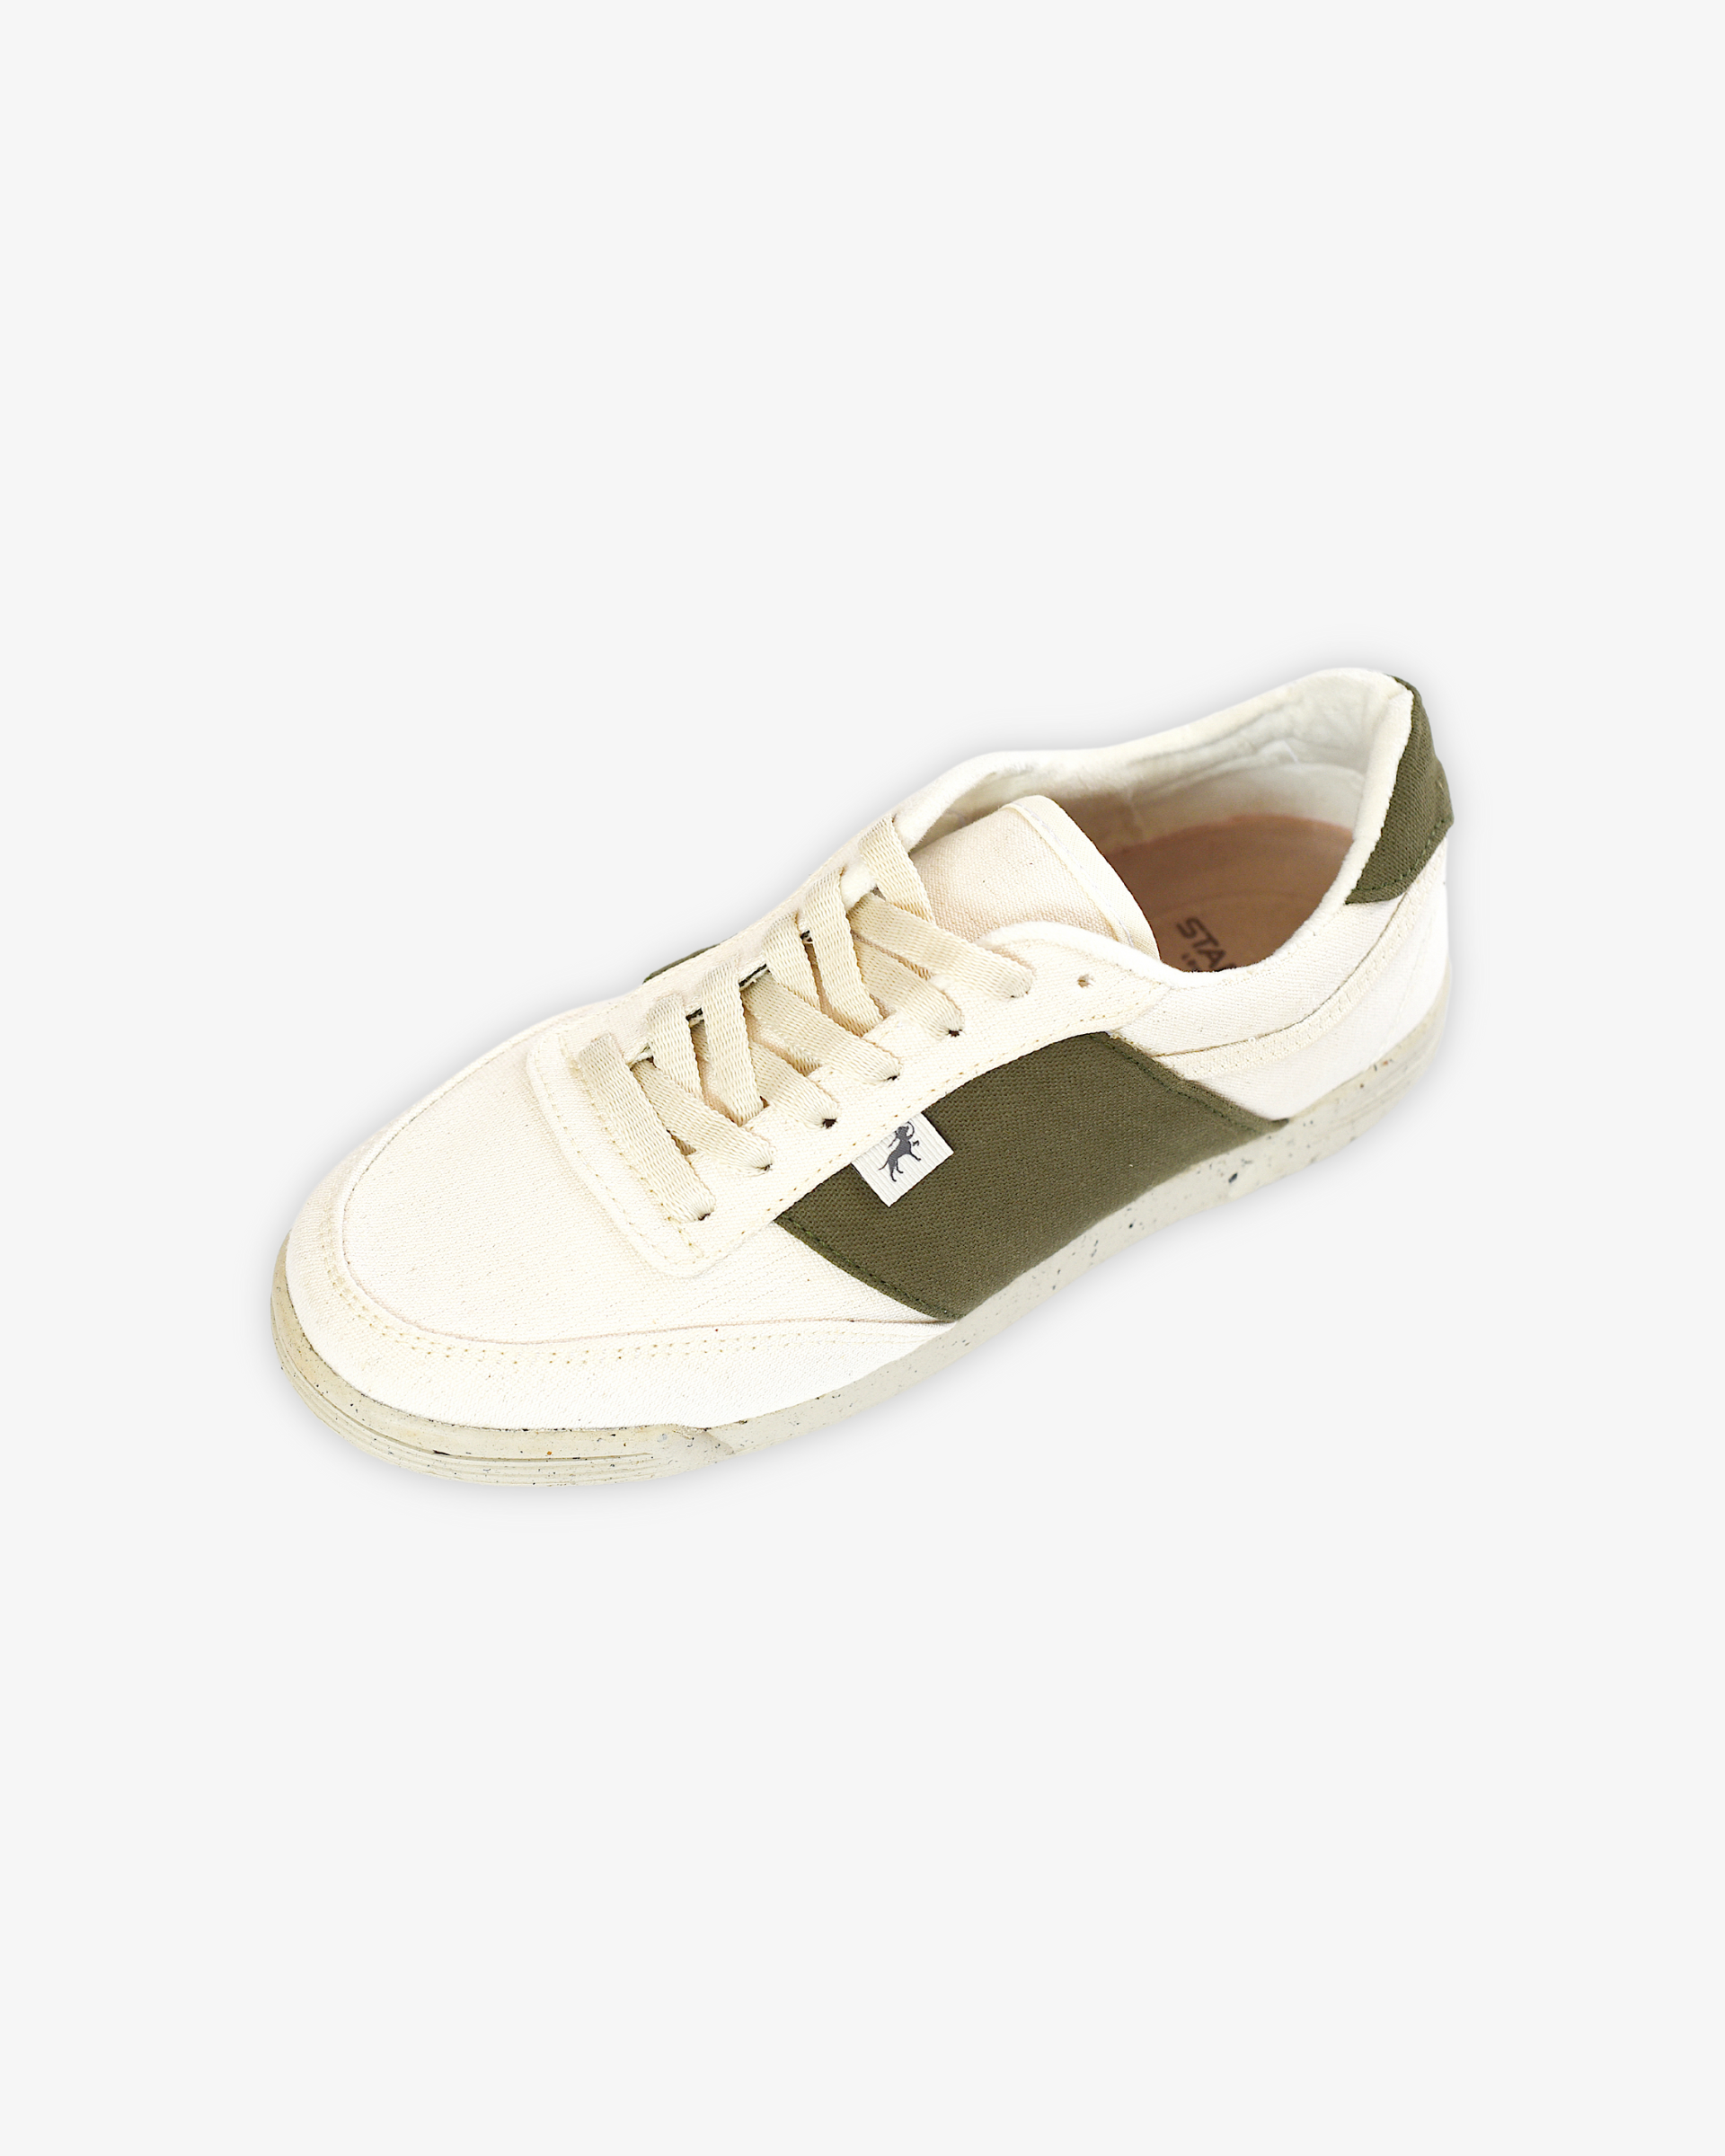 HEMP WOMEN'S EXPEDITION SNEAKERS - WHITE AND GREEN (WOMAN)